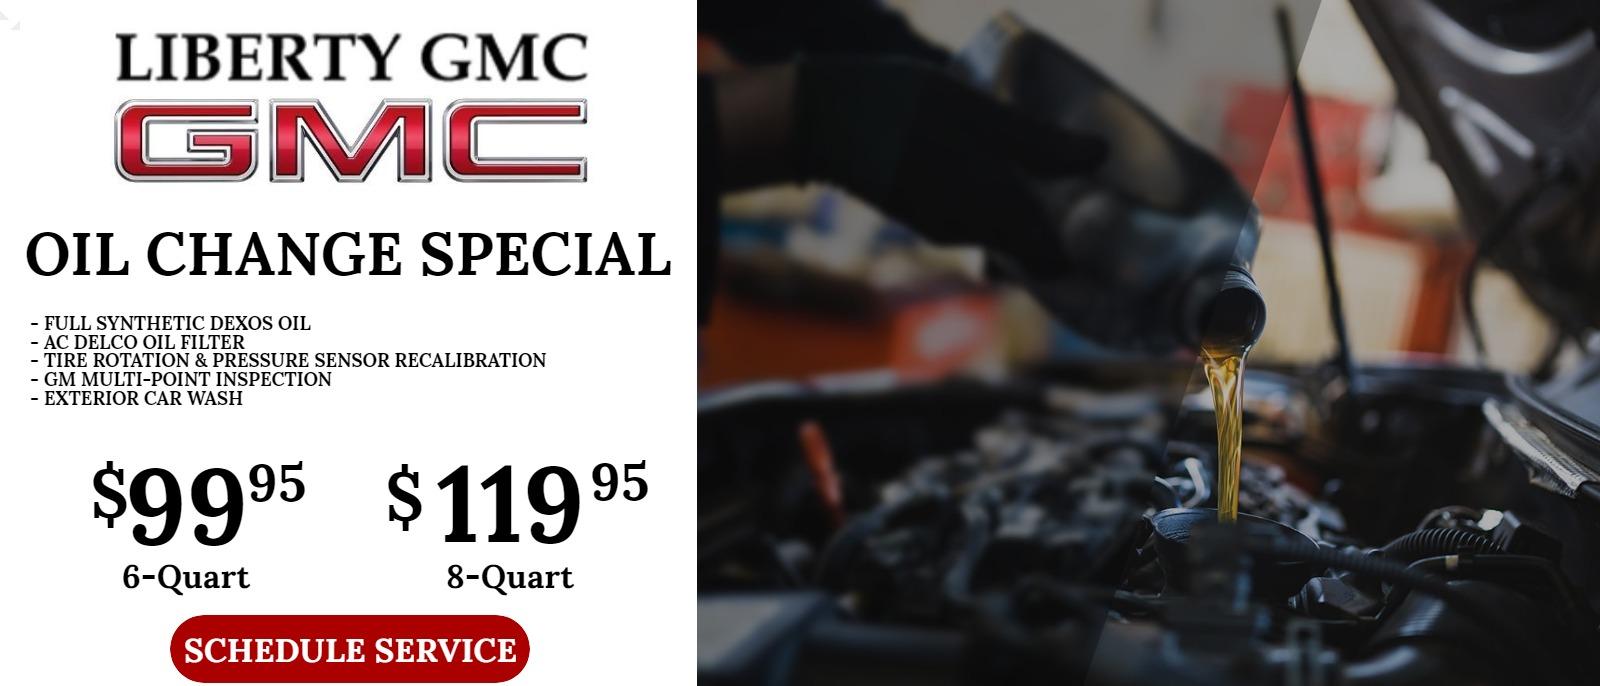 Schedule Your Oil Change with Liberty GMC Today!